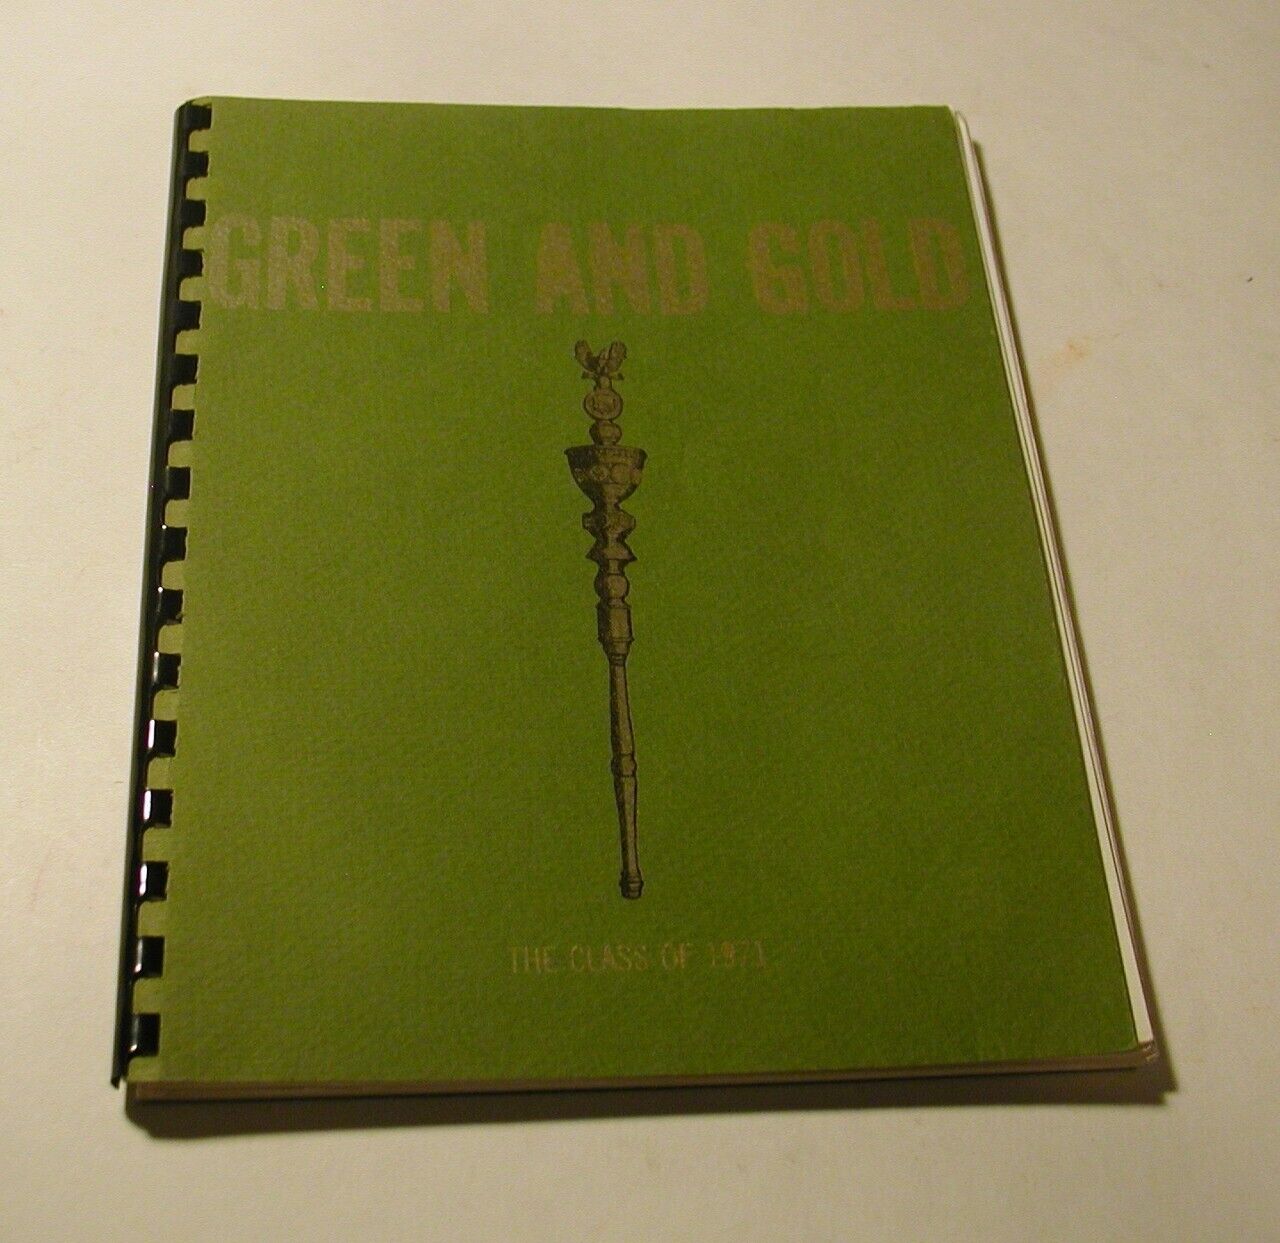 VINTAGE The Green and Gold Class of 1971 The College of William & Mary Virginia